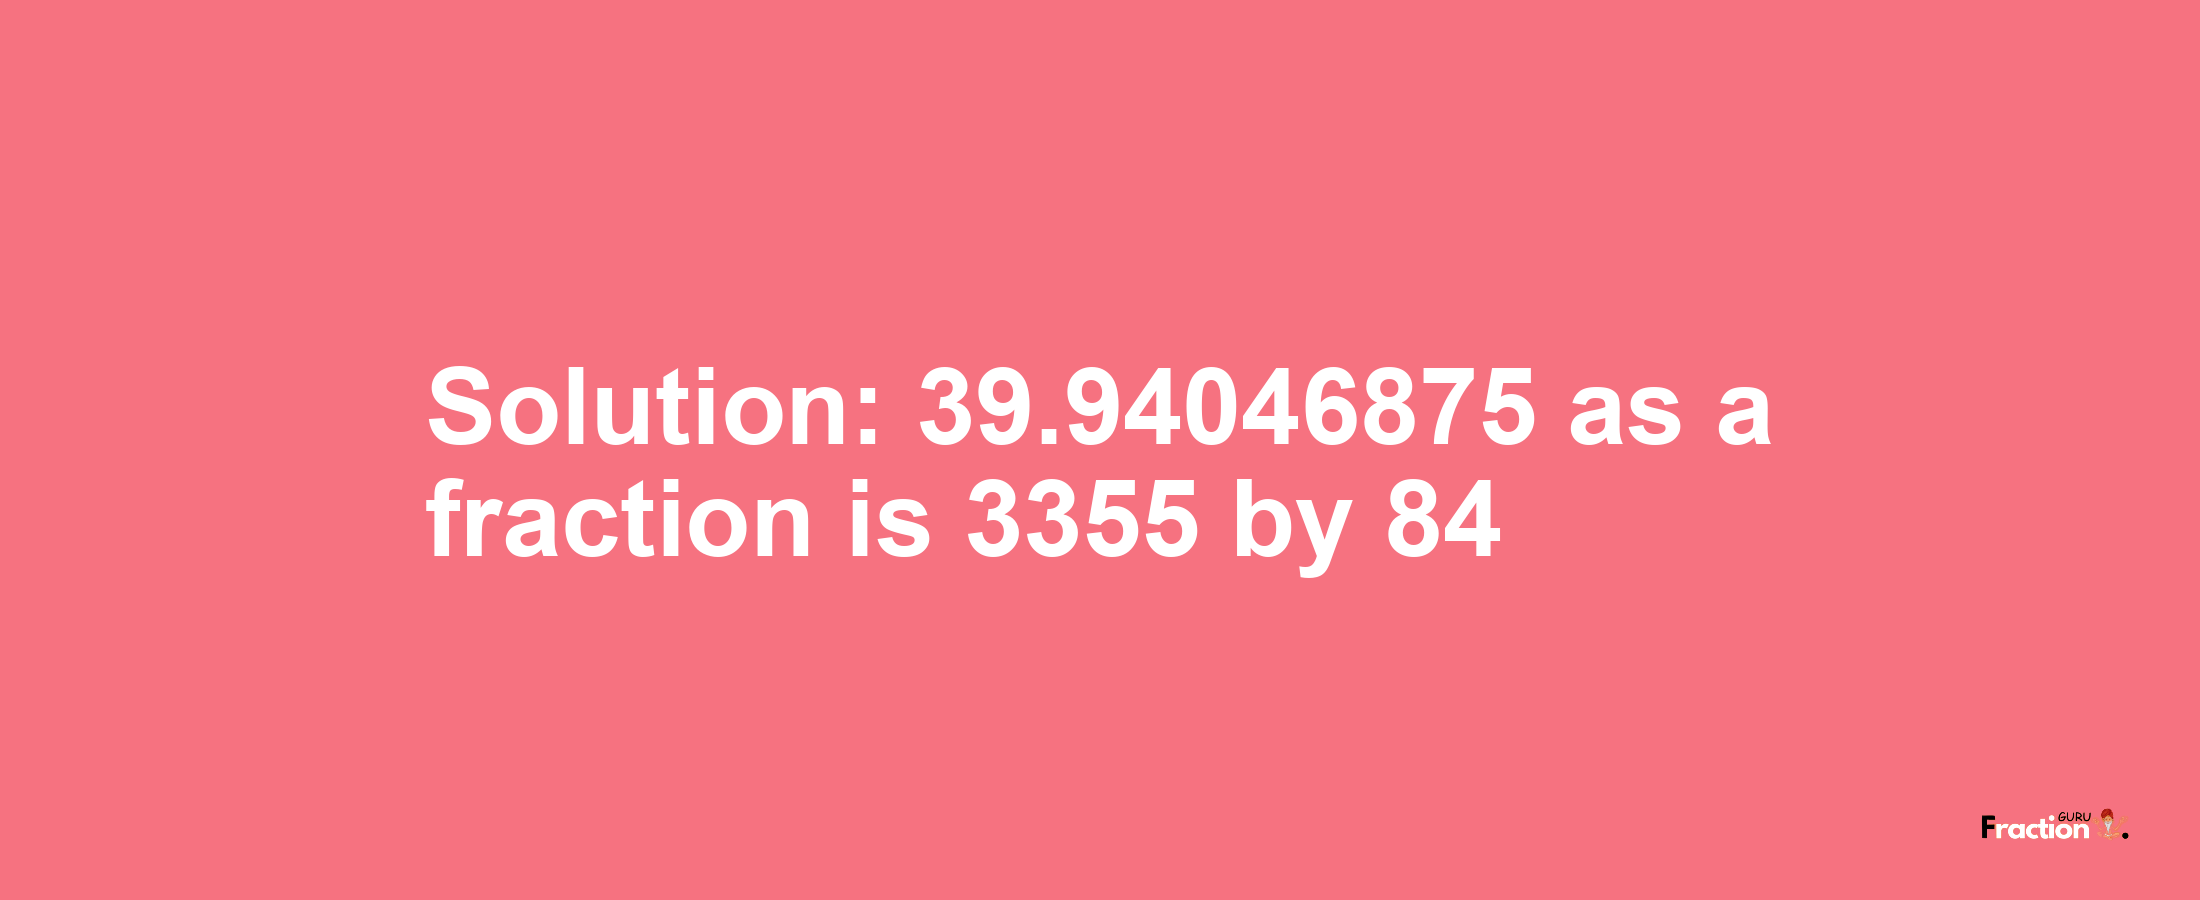 Solution:39.94046875 as a fraction is 3355/84